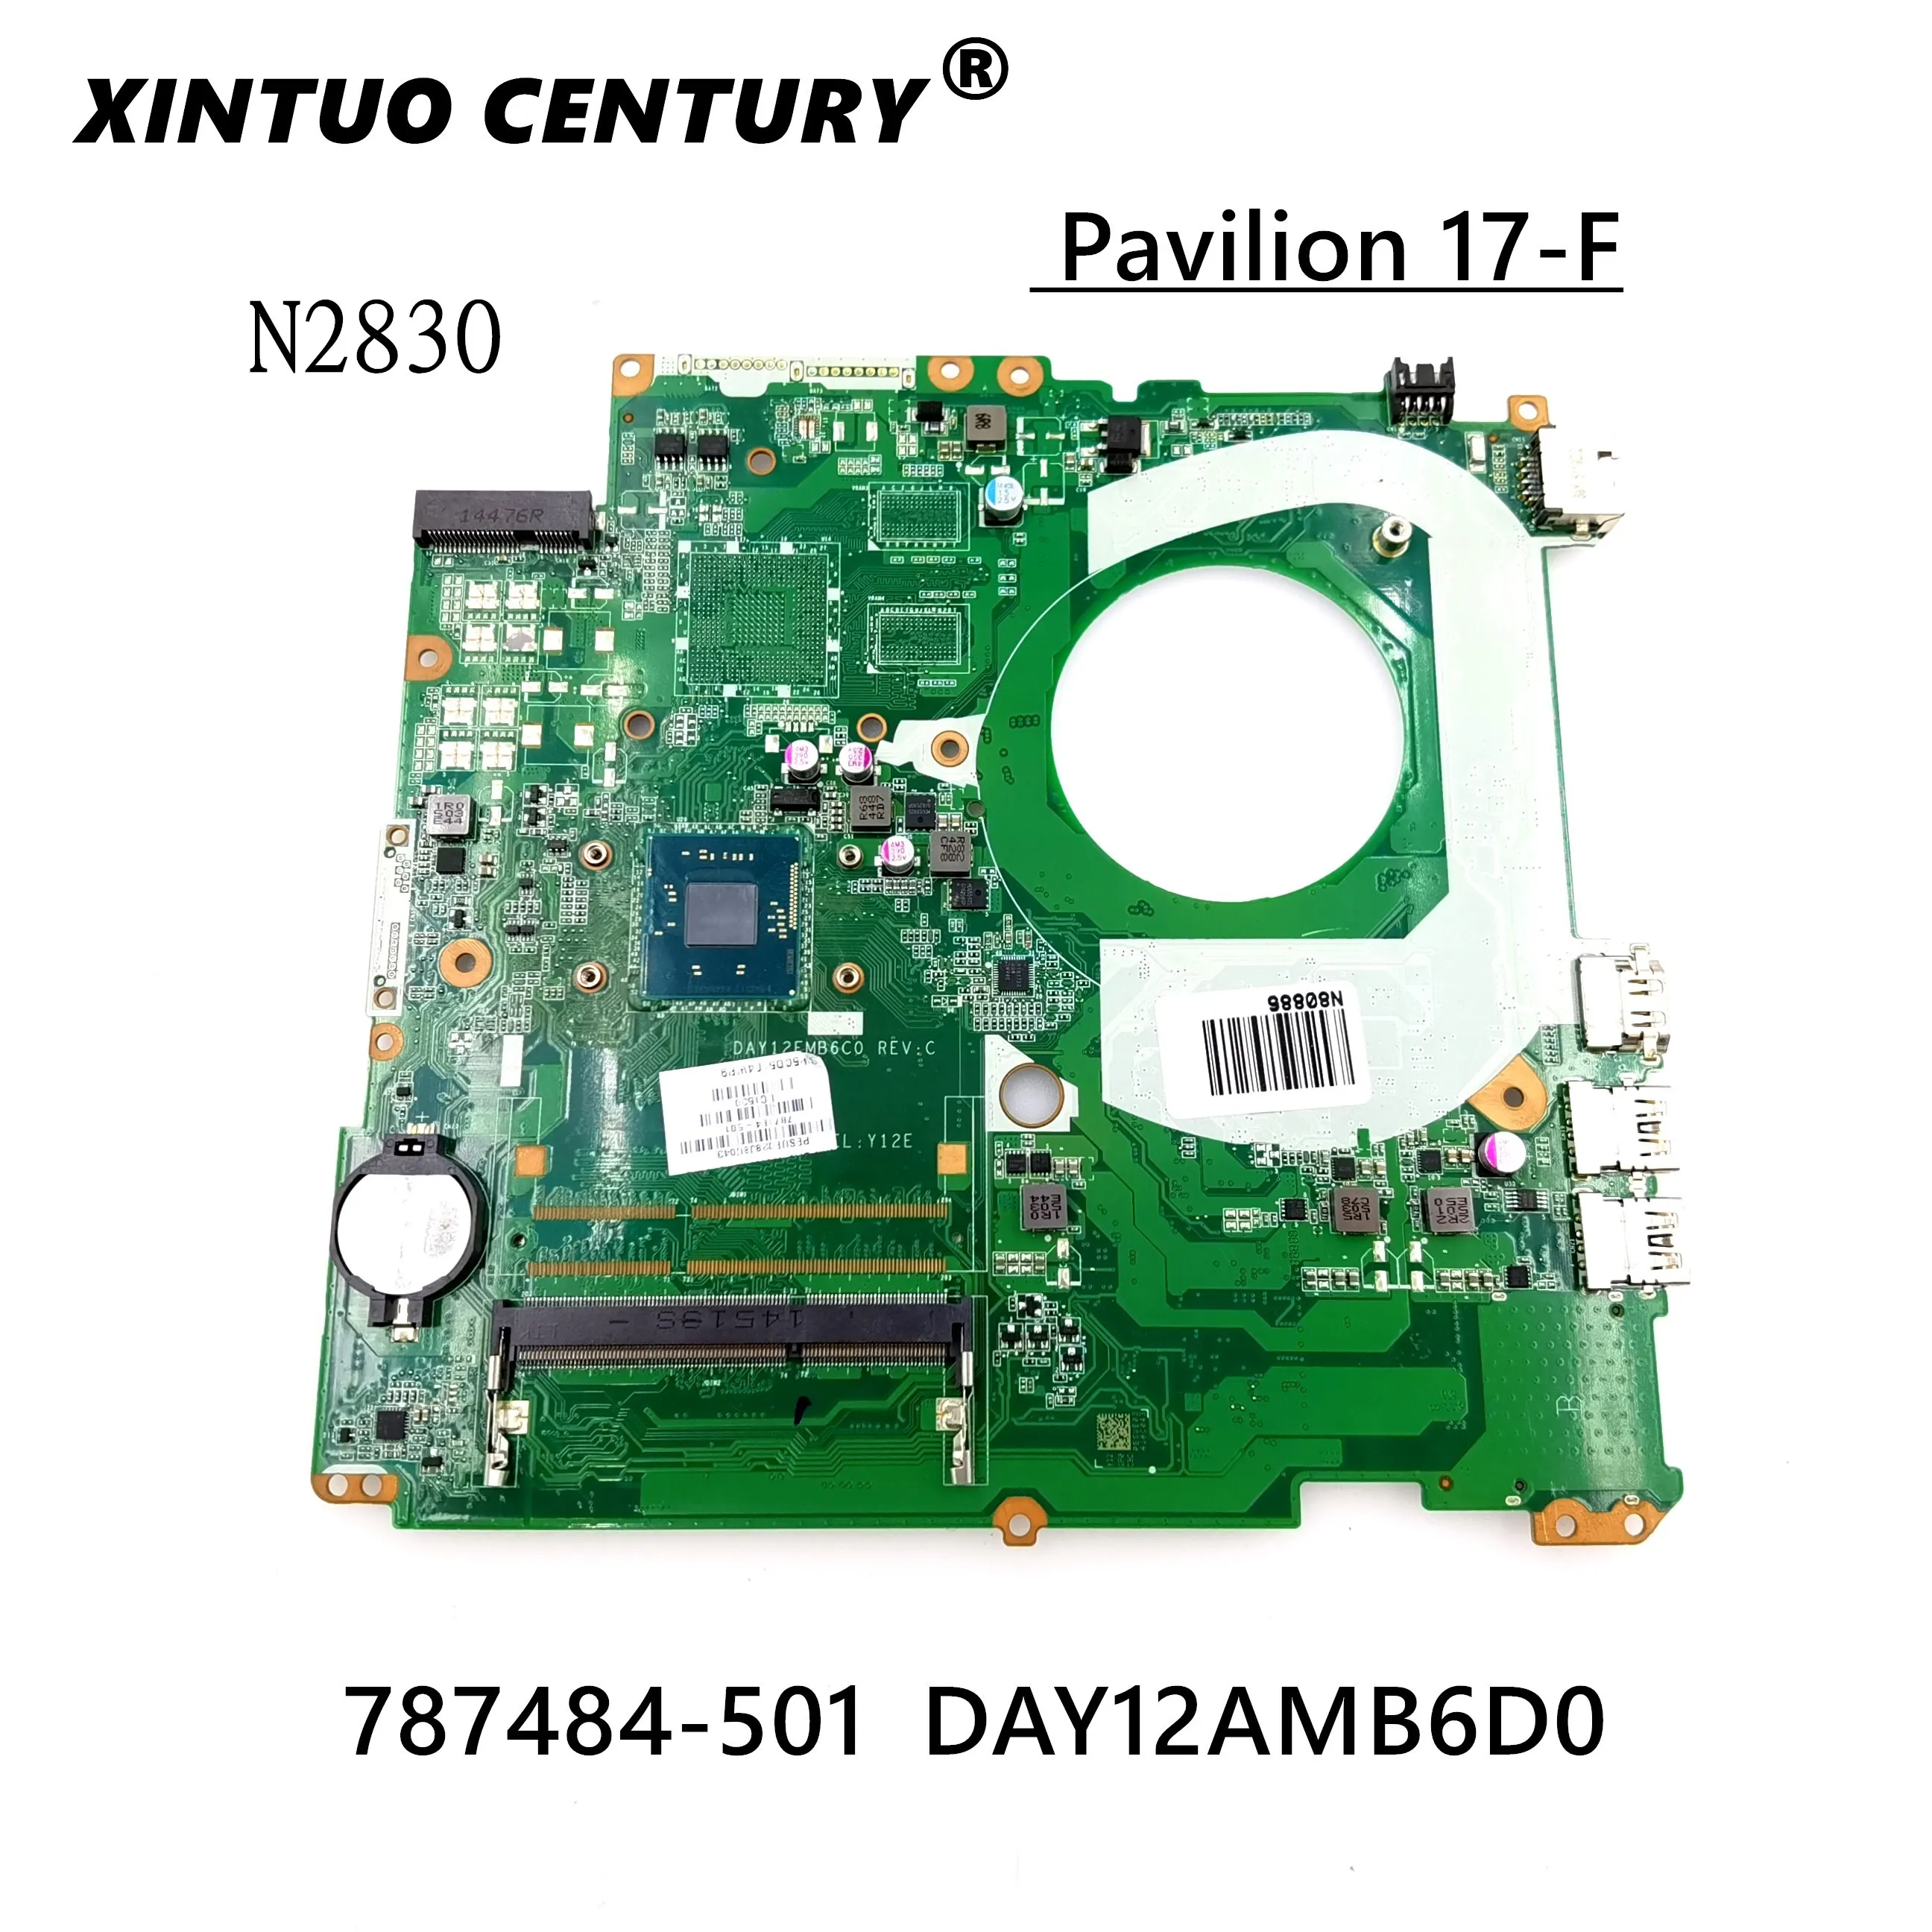 

Laptop motherboard For HP Pavilion 17-F 17' inch Core N2830 Mainboard 787484-001 787484-501 DAY12AMB6D0 SR1W4